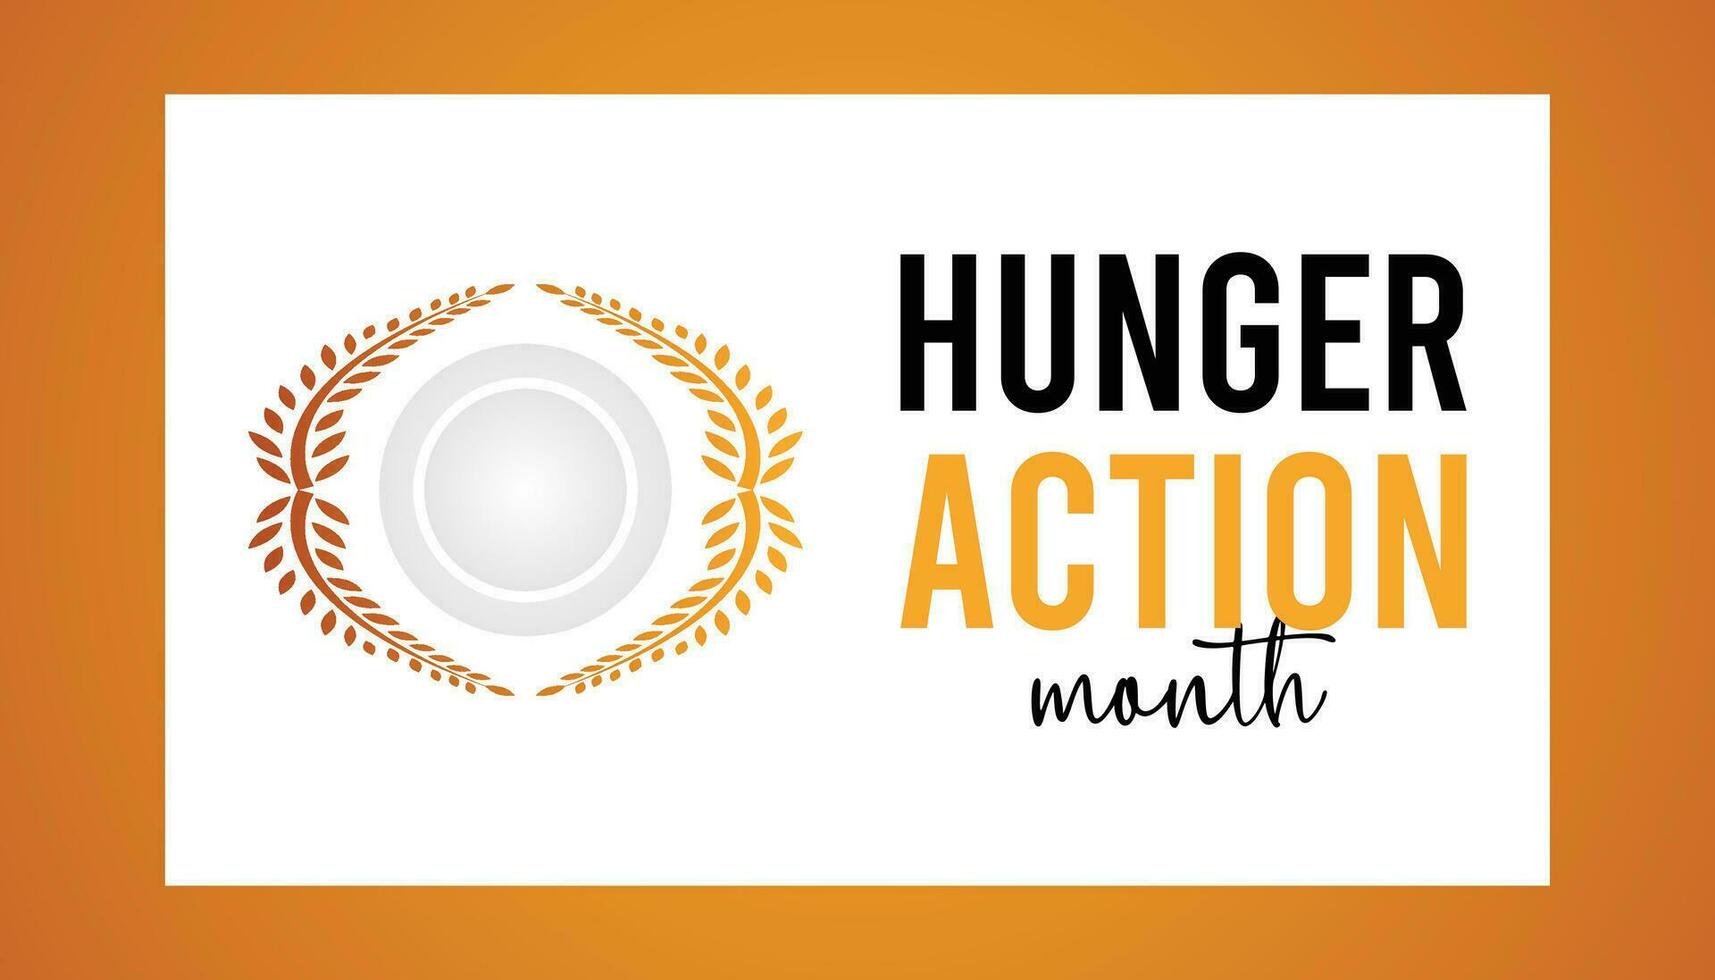 Hunger action month observed each year during September . Vector illustration on the theme of .